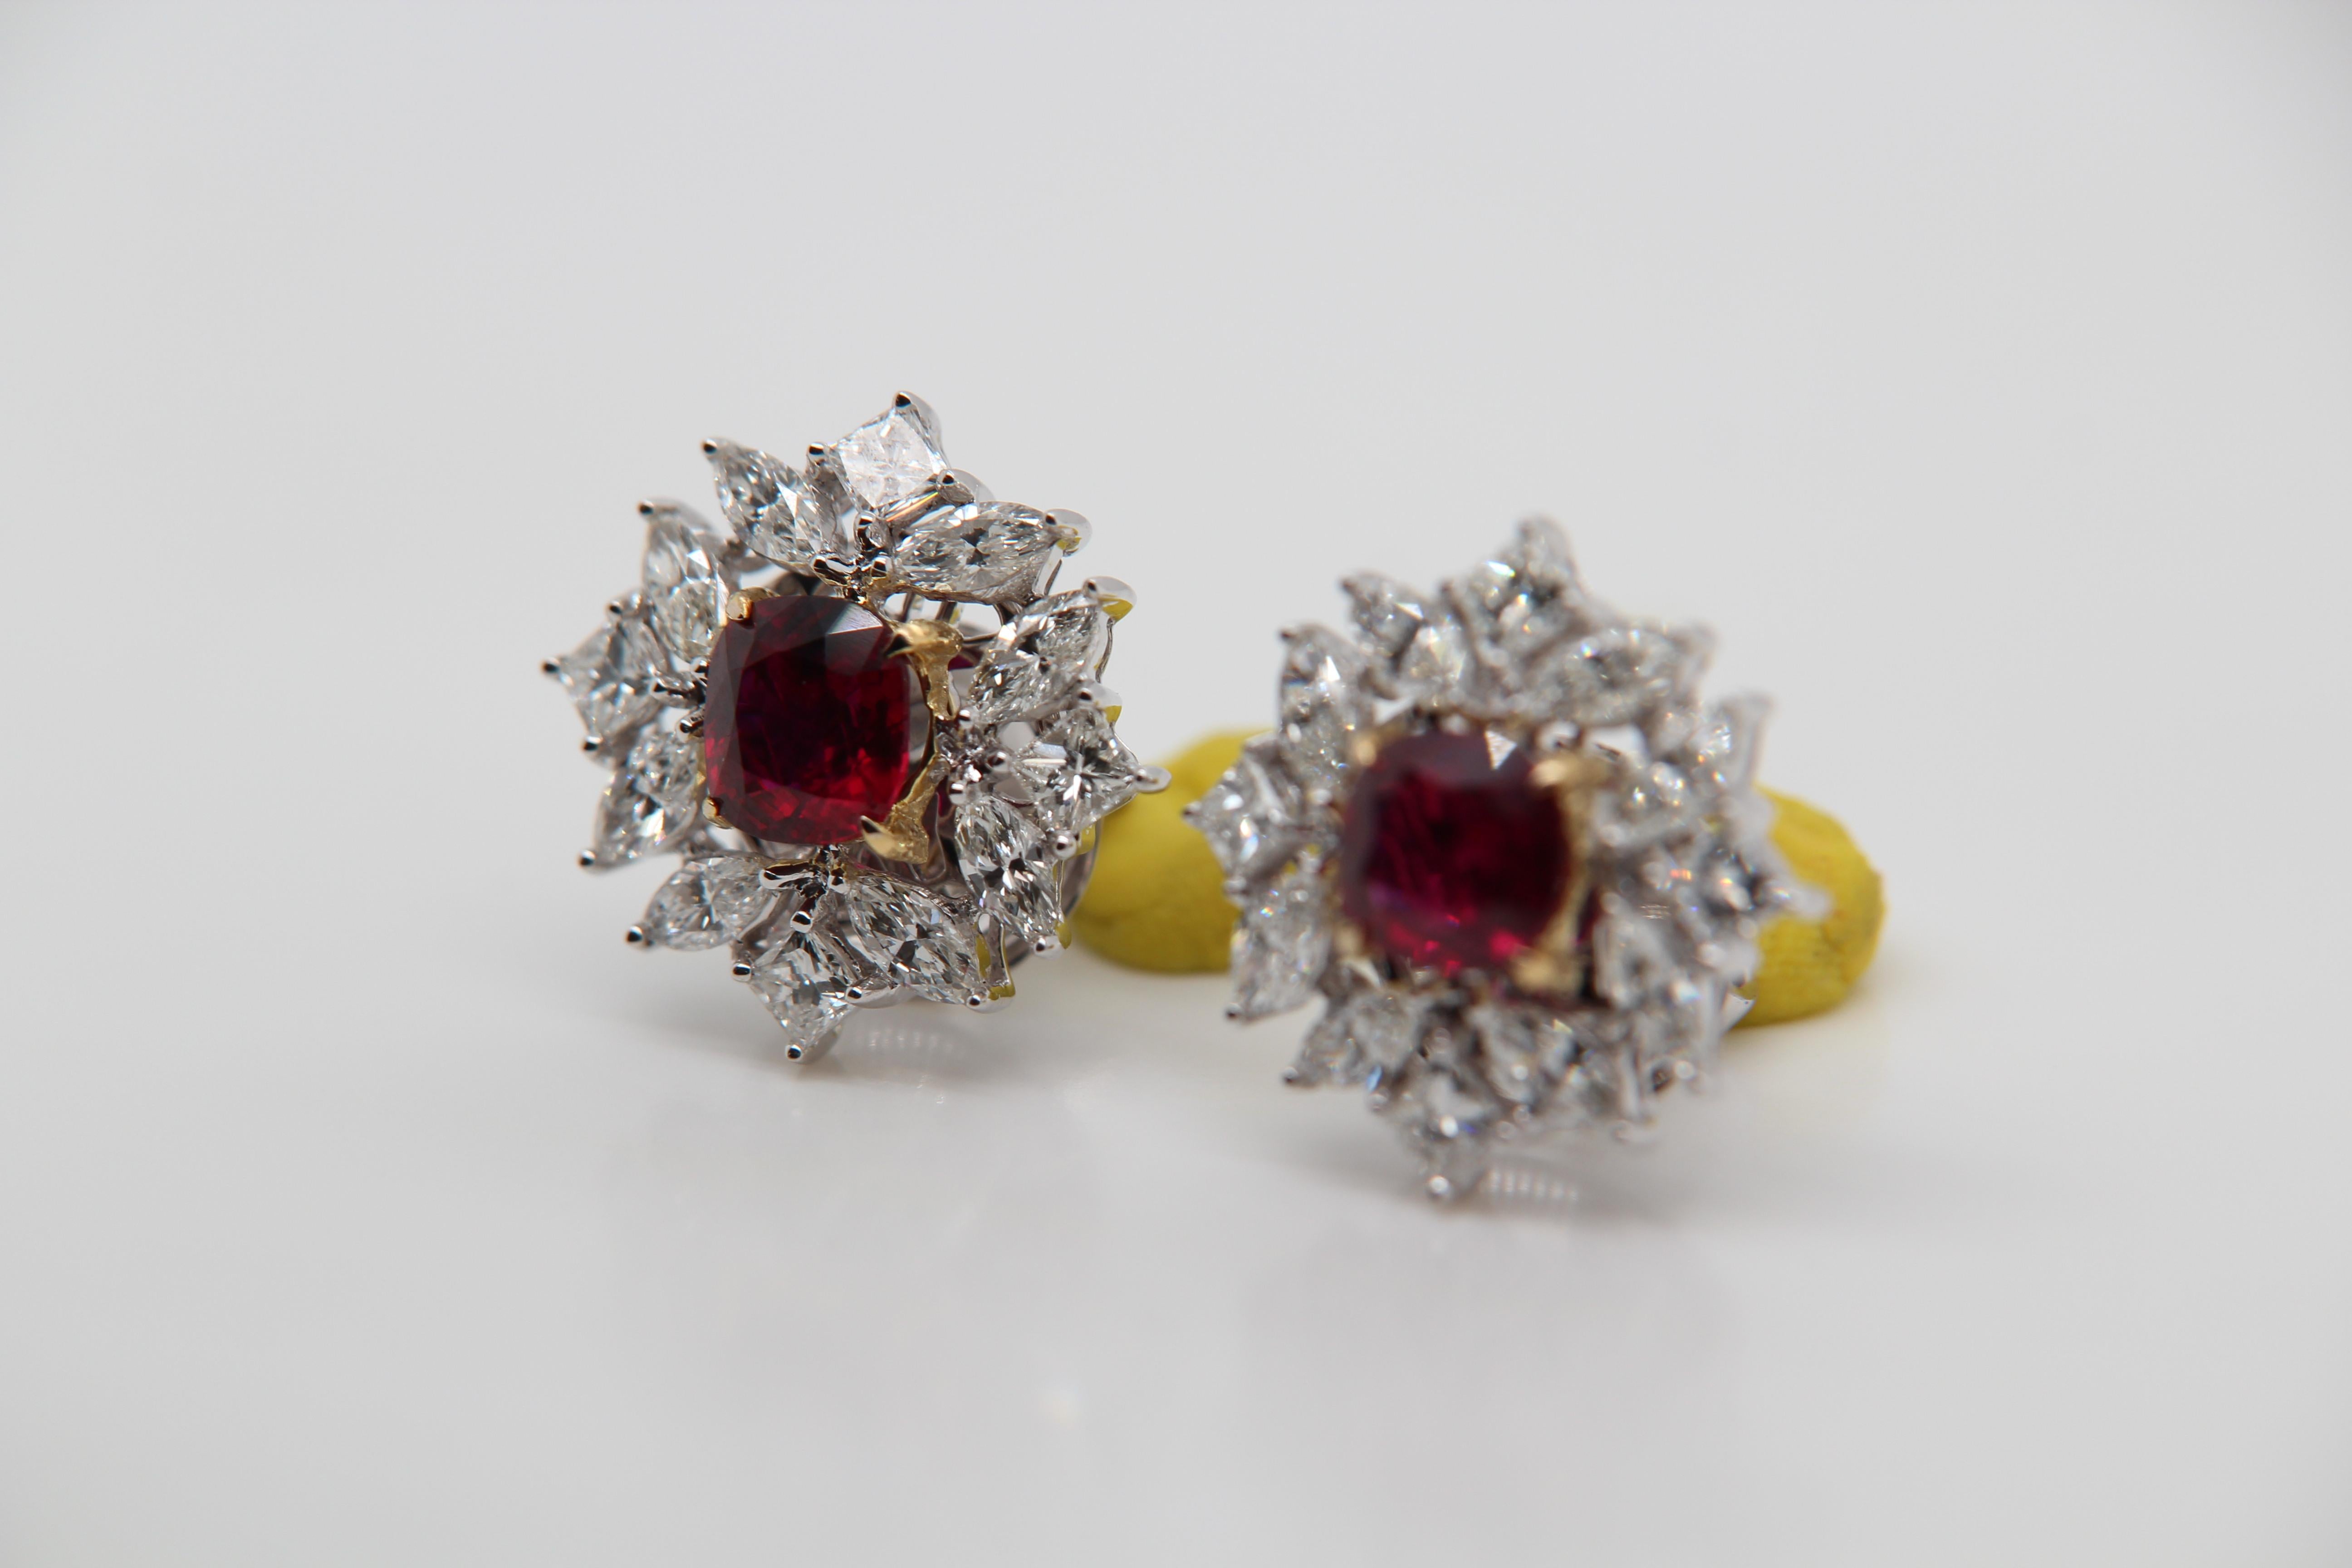 A new 2.15 carat Burmese ruby earring mounted with diamonds in 18 Karat gold. The ruby weighs 1.05 and 1.10 carats and are certified by Gem Research Swisslab (GRS) as natural and no heat. One piece is 'Vivid Red' and the other is 'Vivid Red Pigeon's